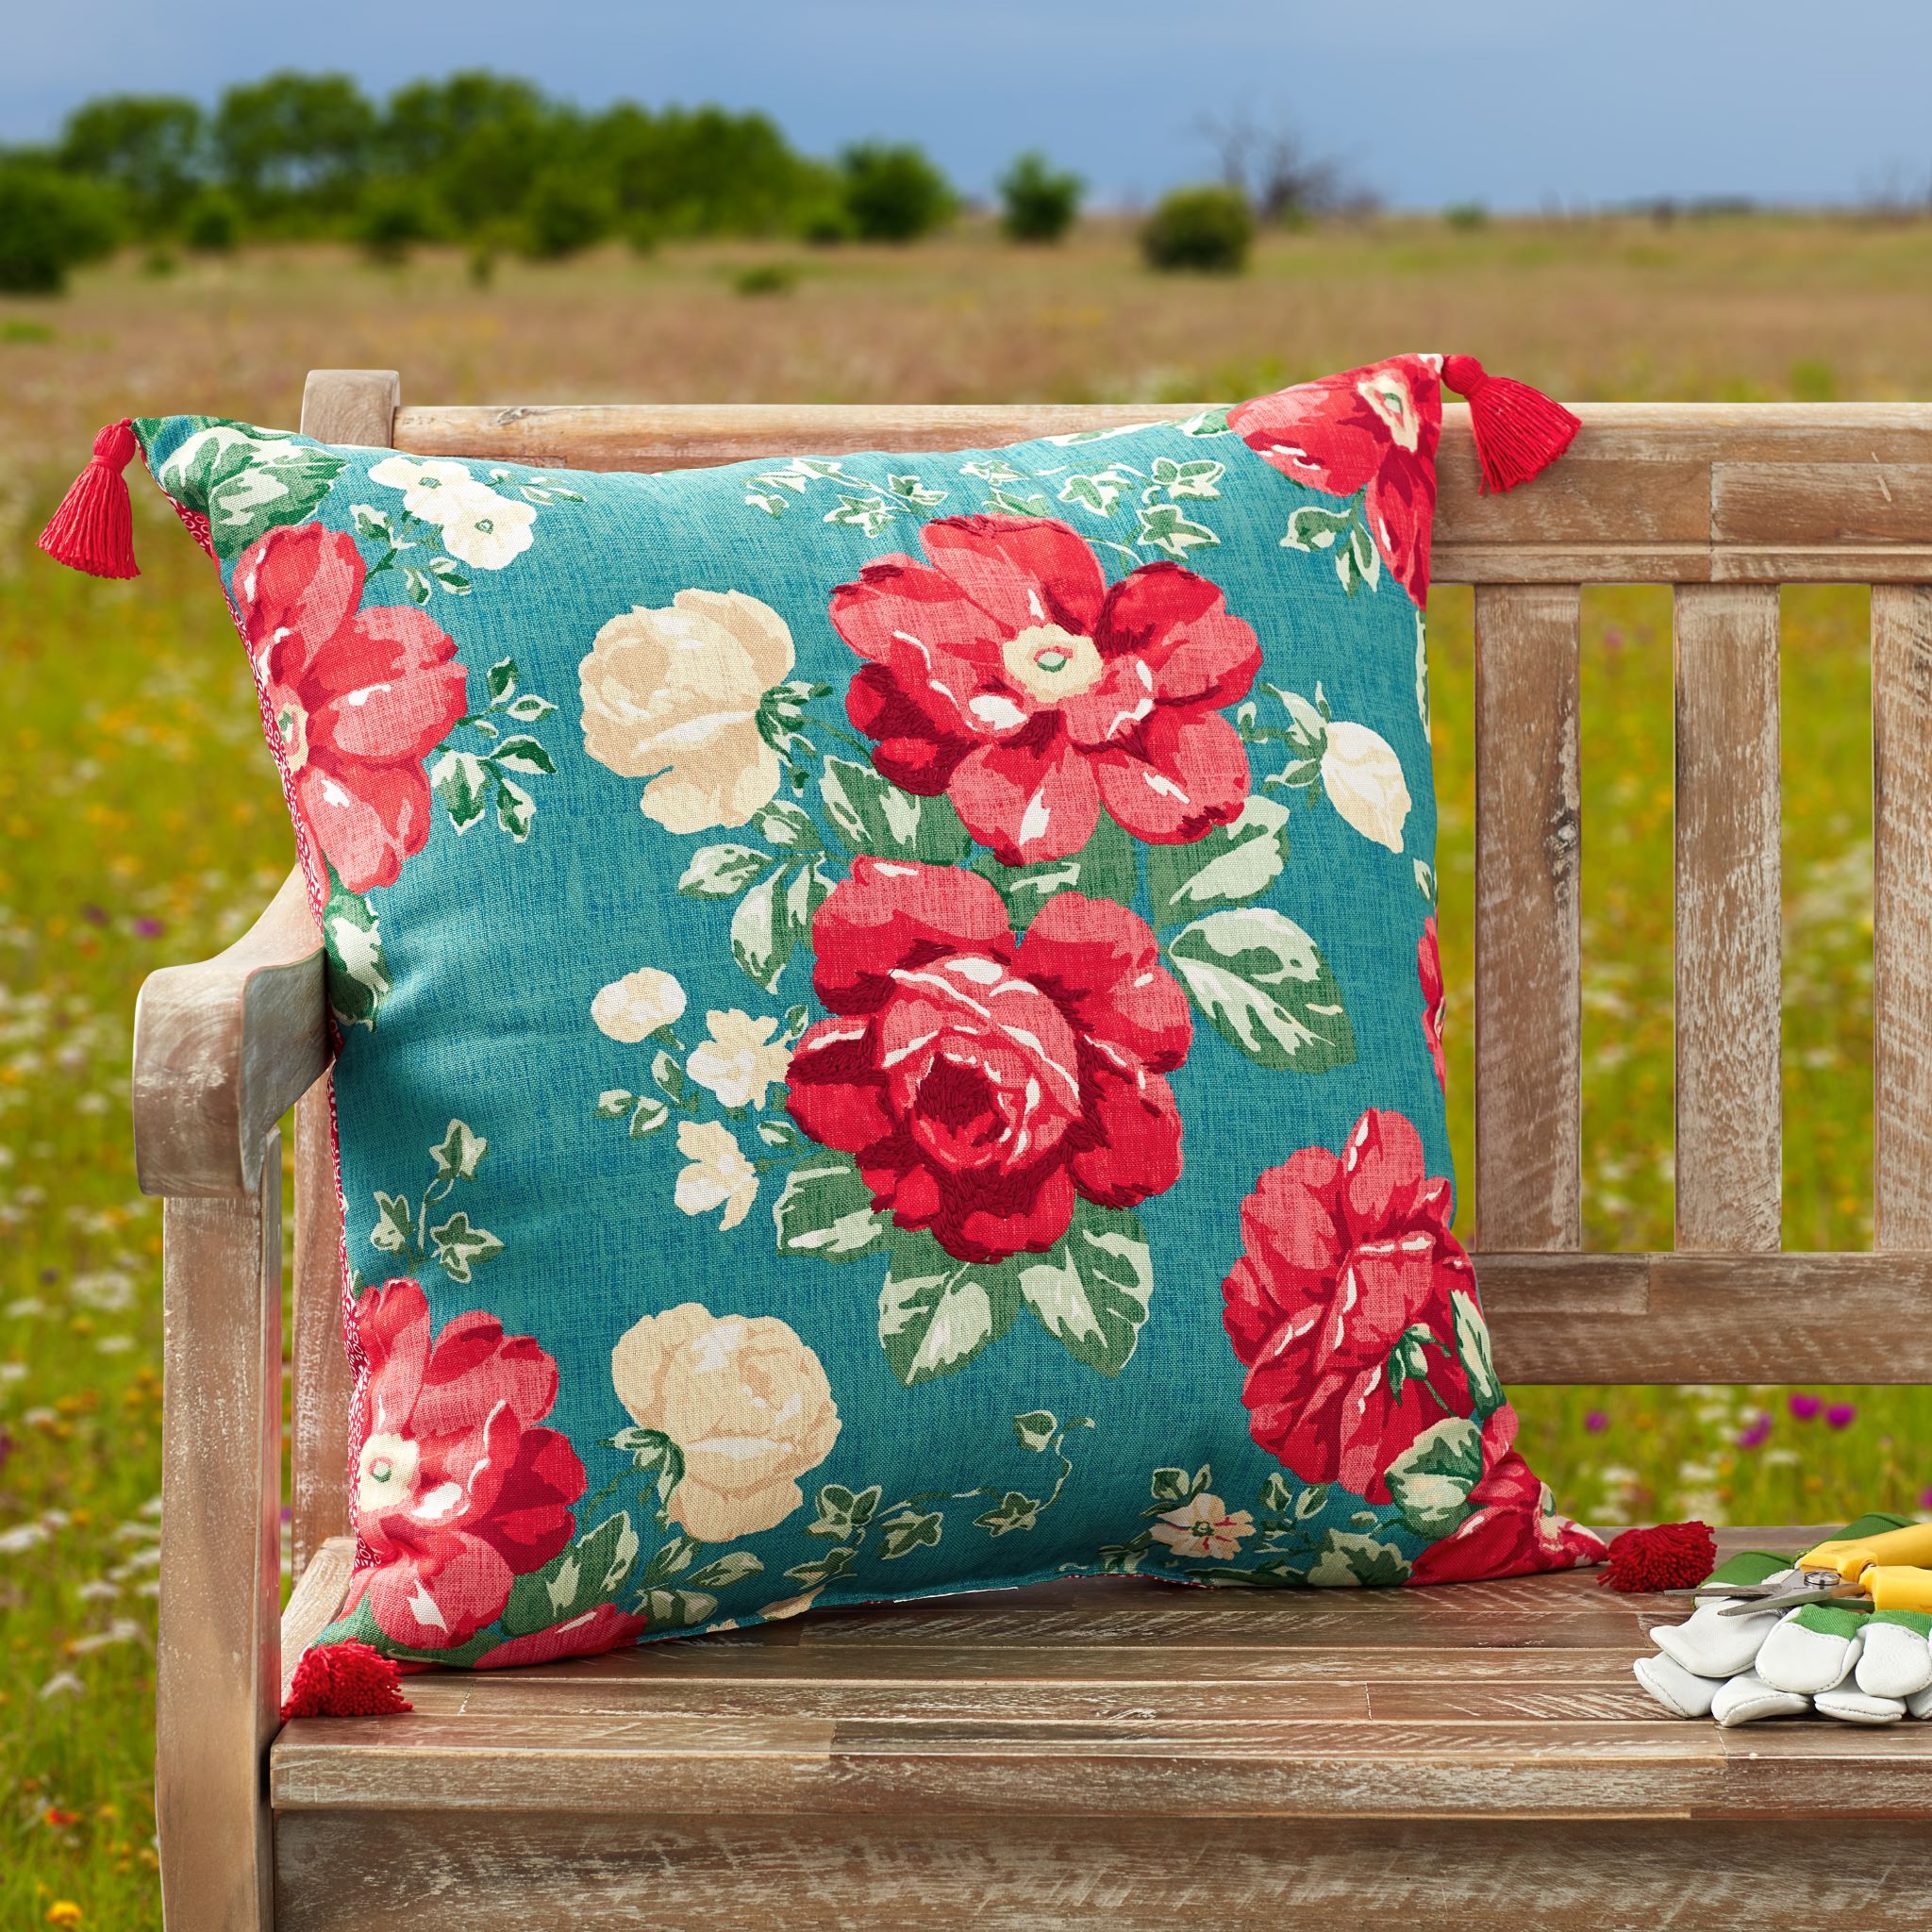 The Pioneer Woman Embr Vint Floral Outdoor Pillow, 20" x 20", Multicolor - image 3 of 9